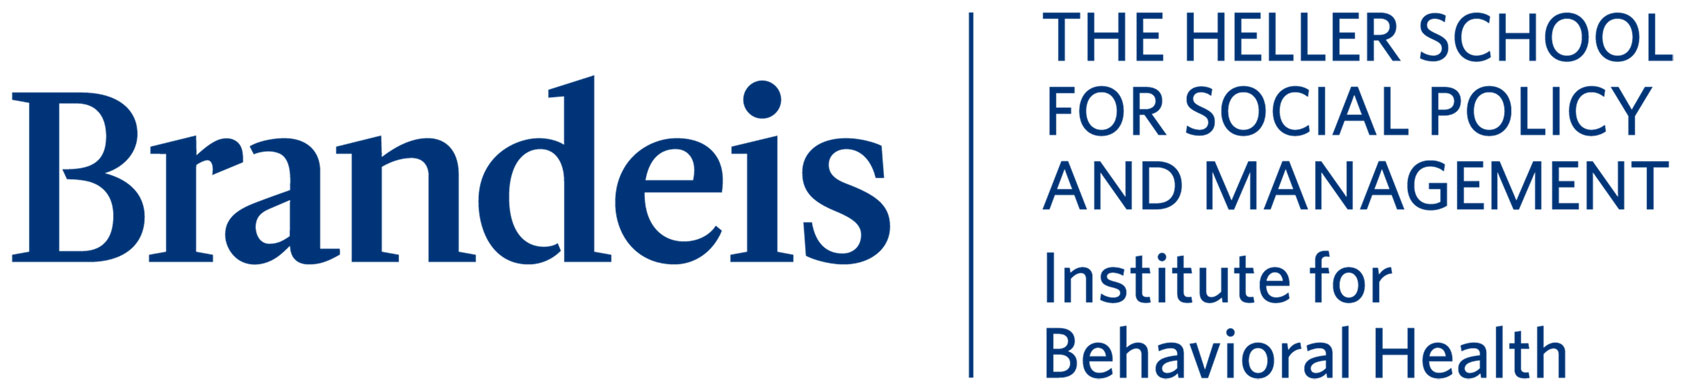 Brandeis The Heller School for Social Policy and Management Institute for Behavioral Health logo